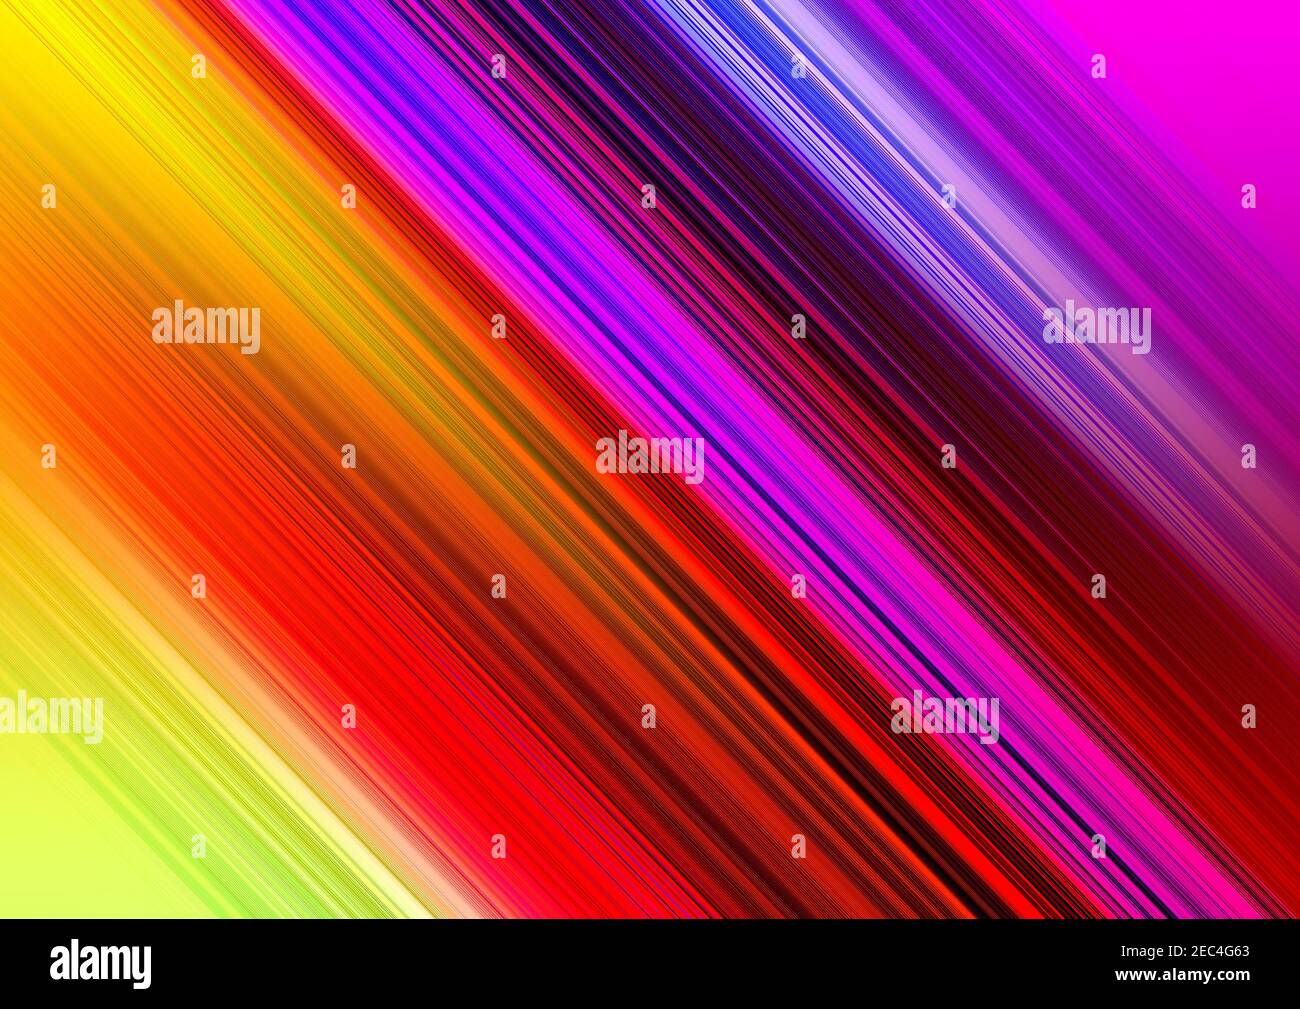 orange red purple pink blue white motion blur abstract background Stock Photo